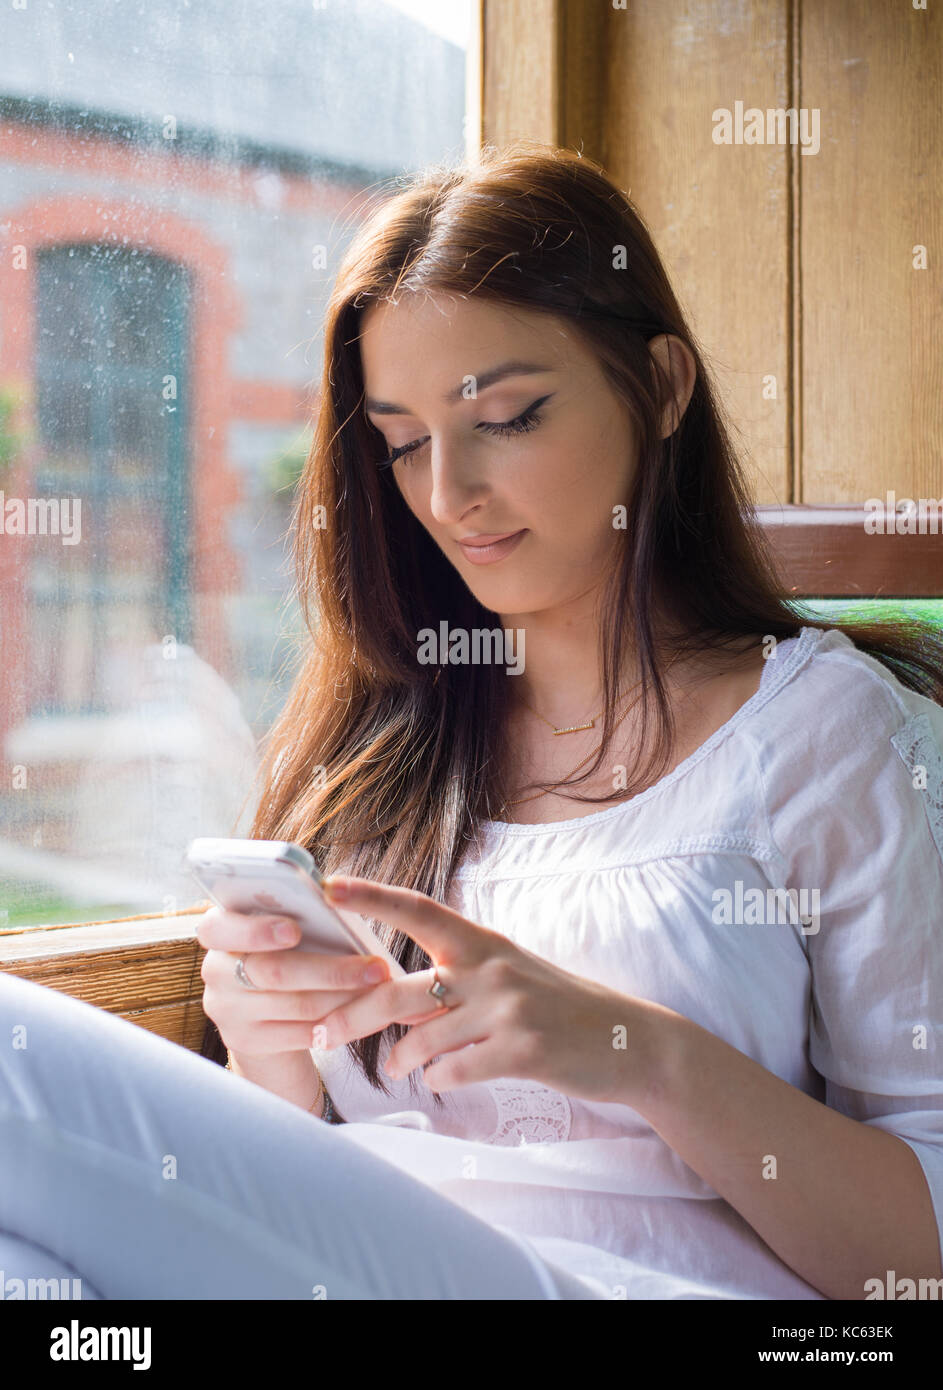 Pretty young lady on an old train using her cellphone Stock Photo